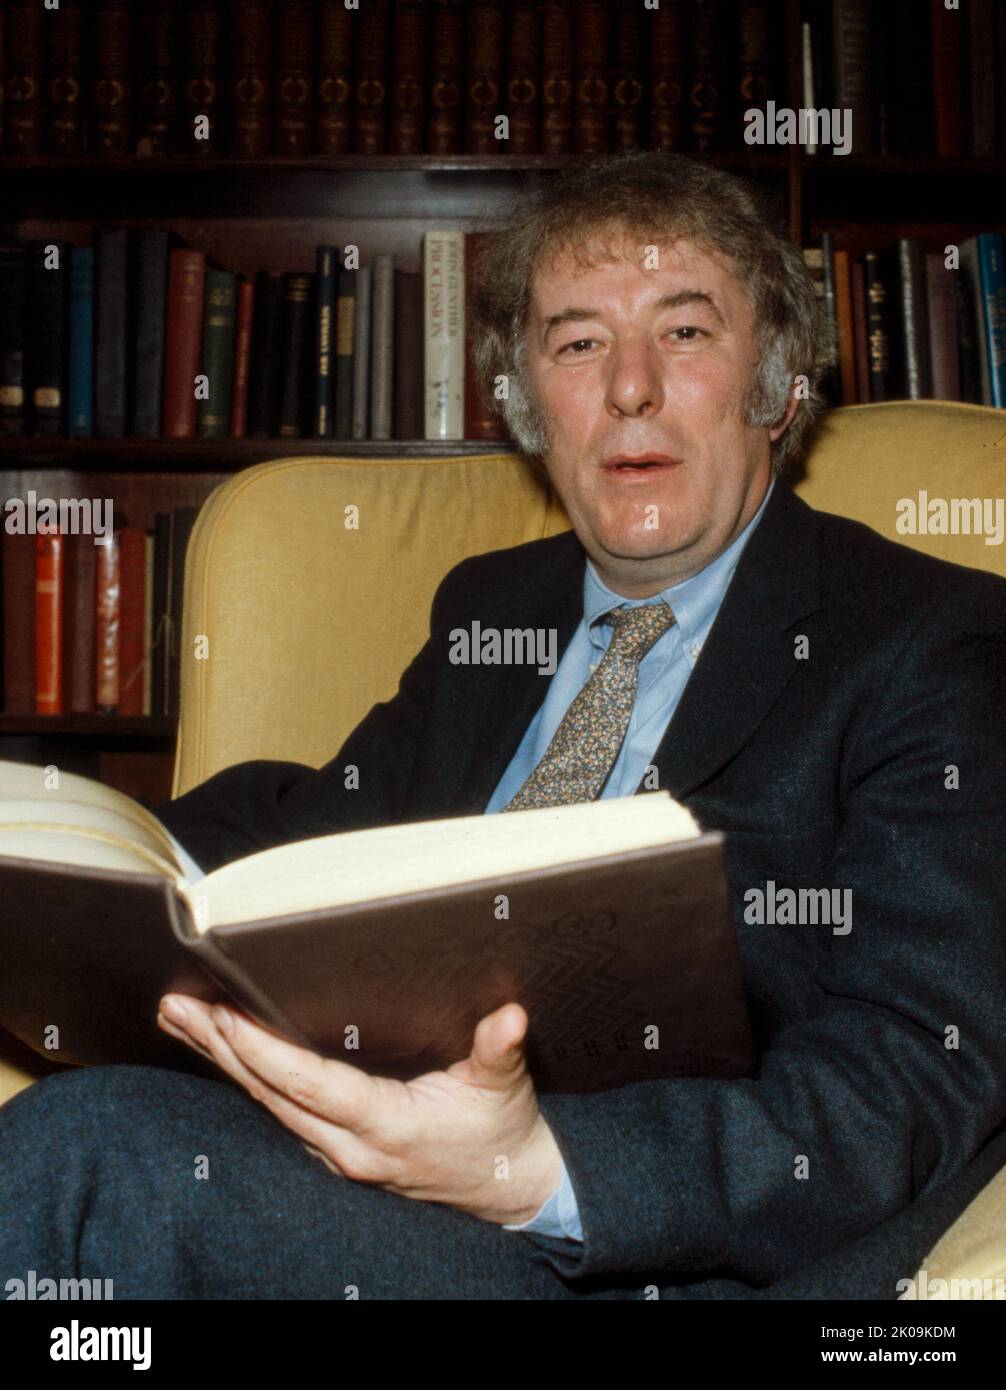 Seamus Heaney (1939 - 2013) Irish poet, playwright and translator. He received the 1995 Nobel Prize in Literature. Among his best-known works is Death of a Naturalist (1966), his first major published volume. Heaney was and is still recognised as one of the principal contributors to poetry in Ireland during his lifetime. Stock Photo